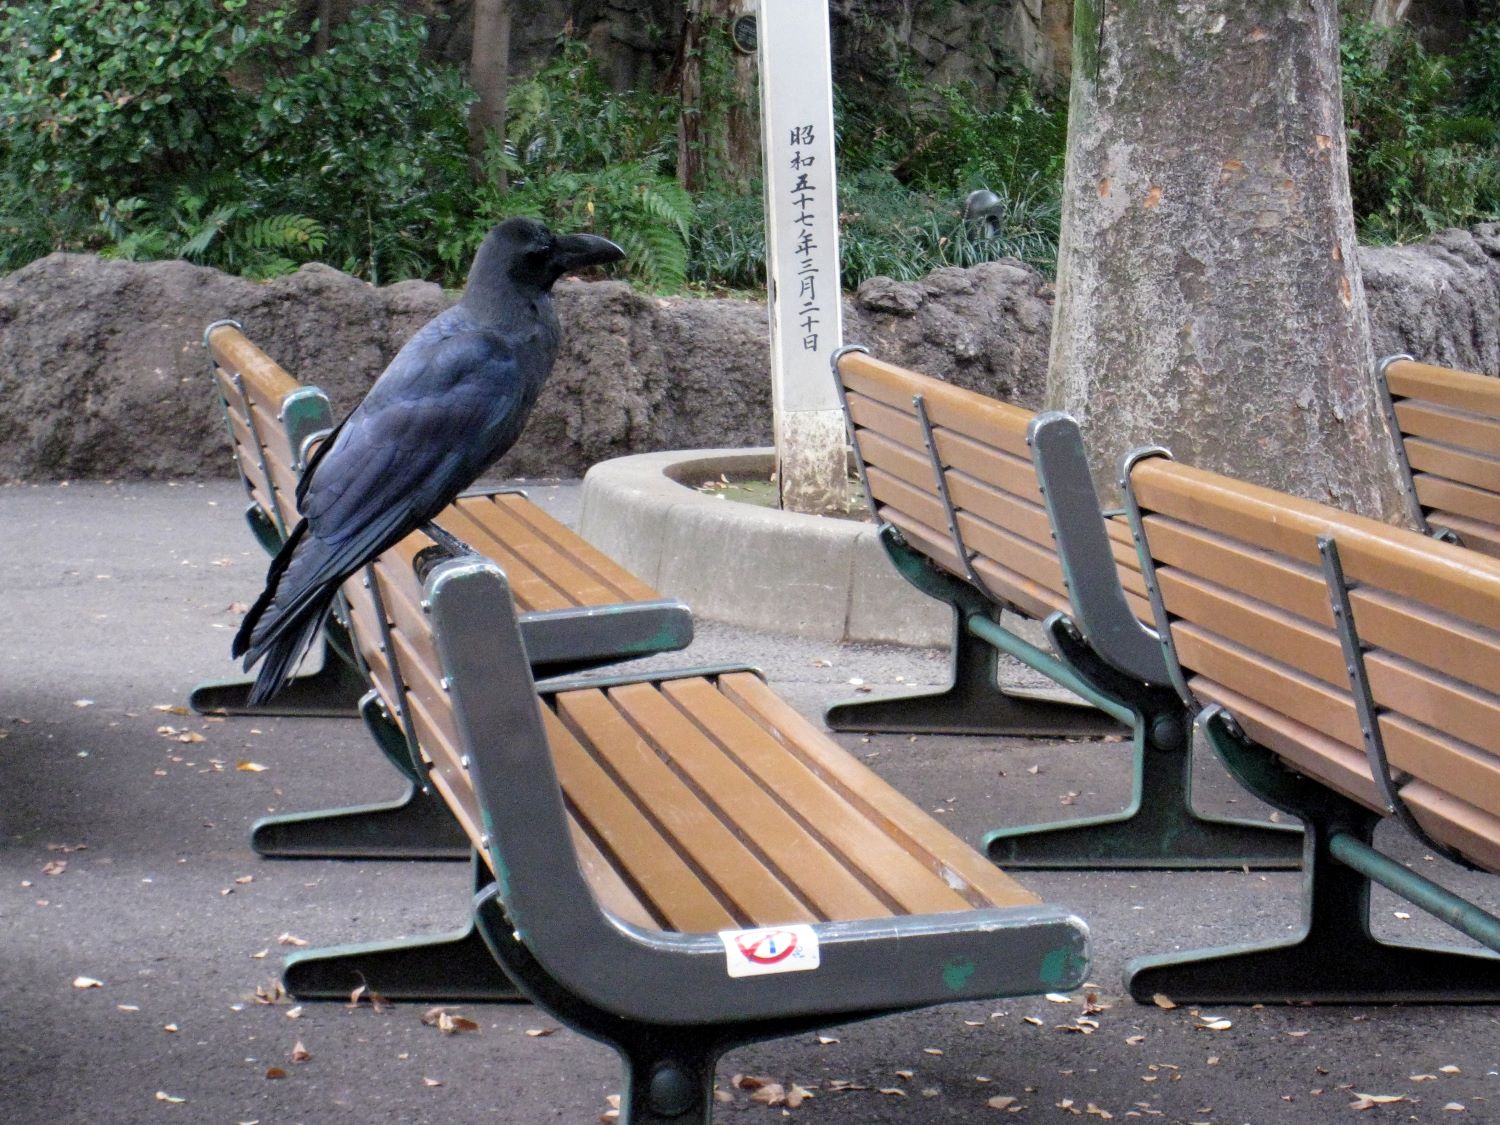 A large black bird, called a large-billed crow, perches on the back of an empty public park bench. Other benches and greenery are visible in the background. Japanese characters are visible on a post in the backgorund.